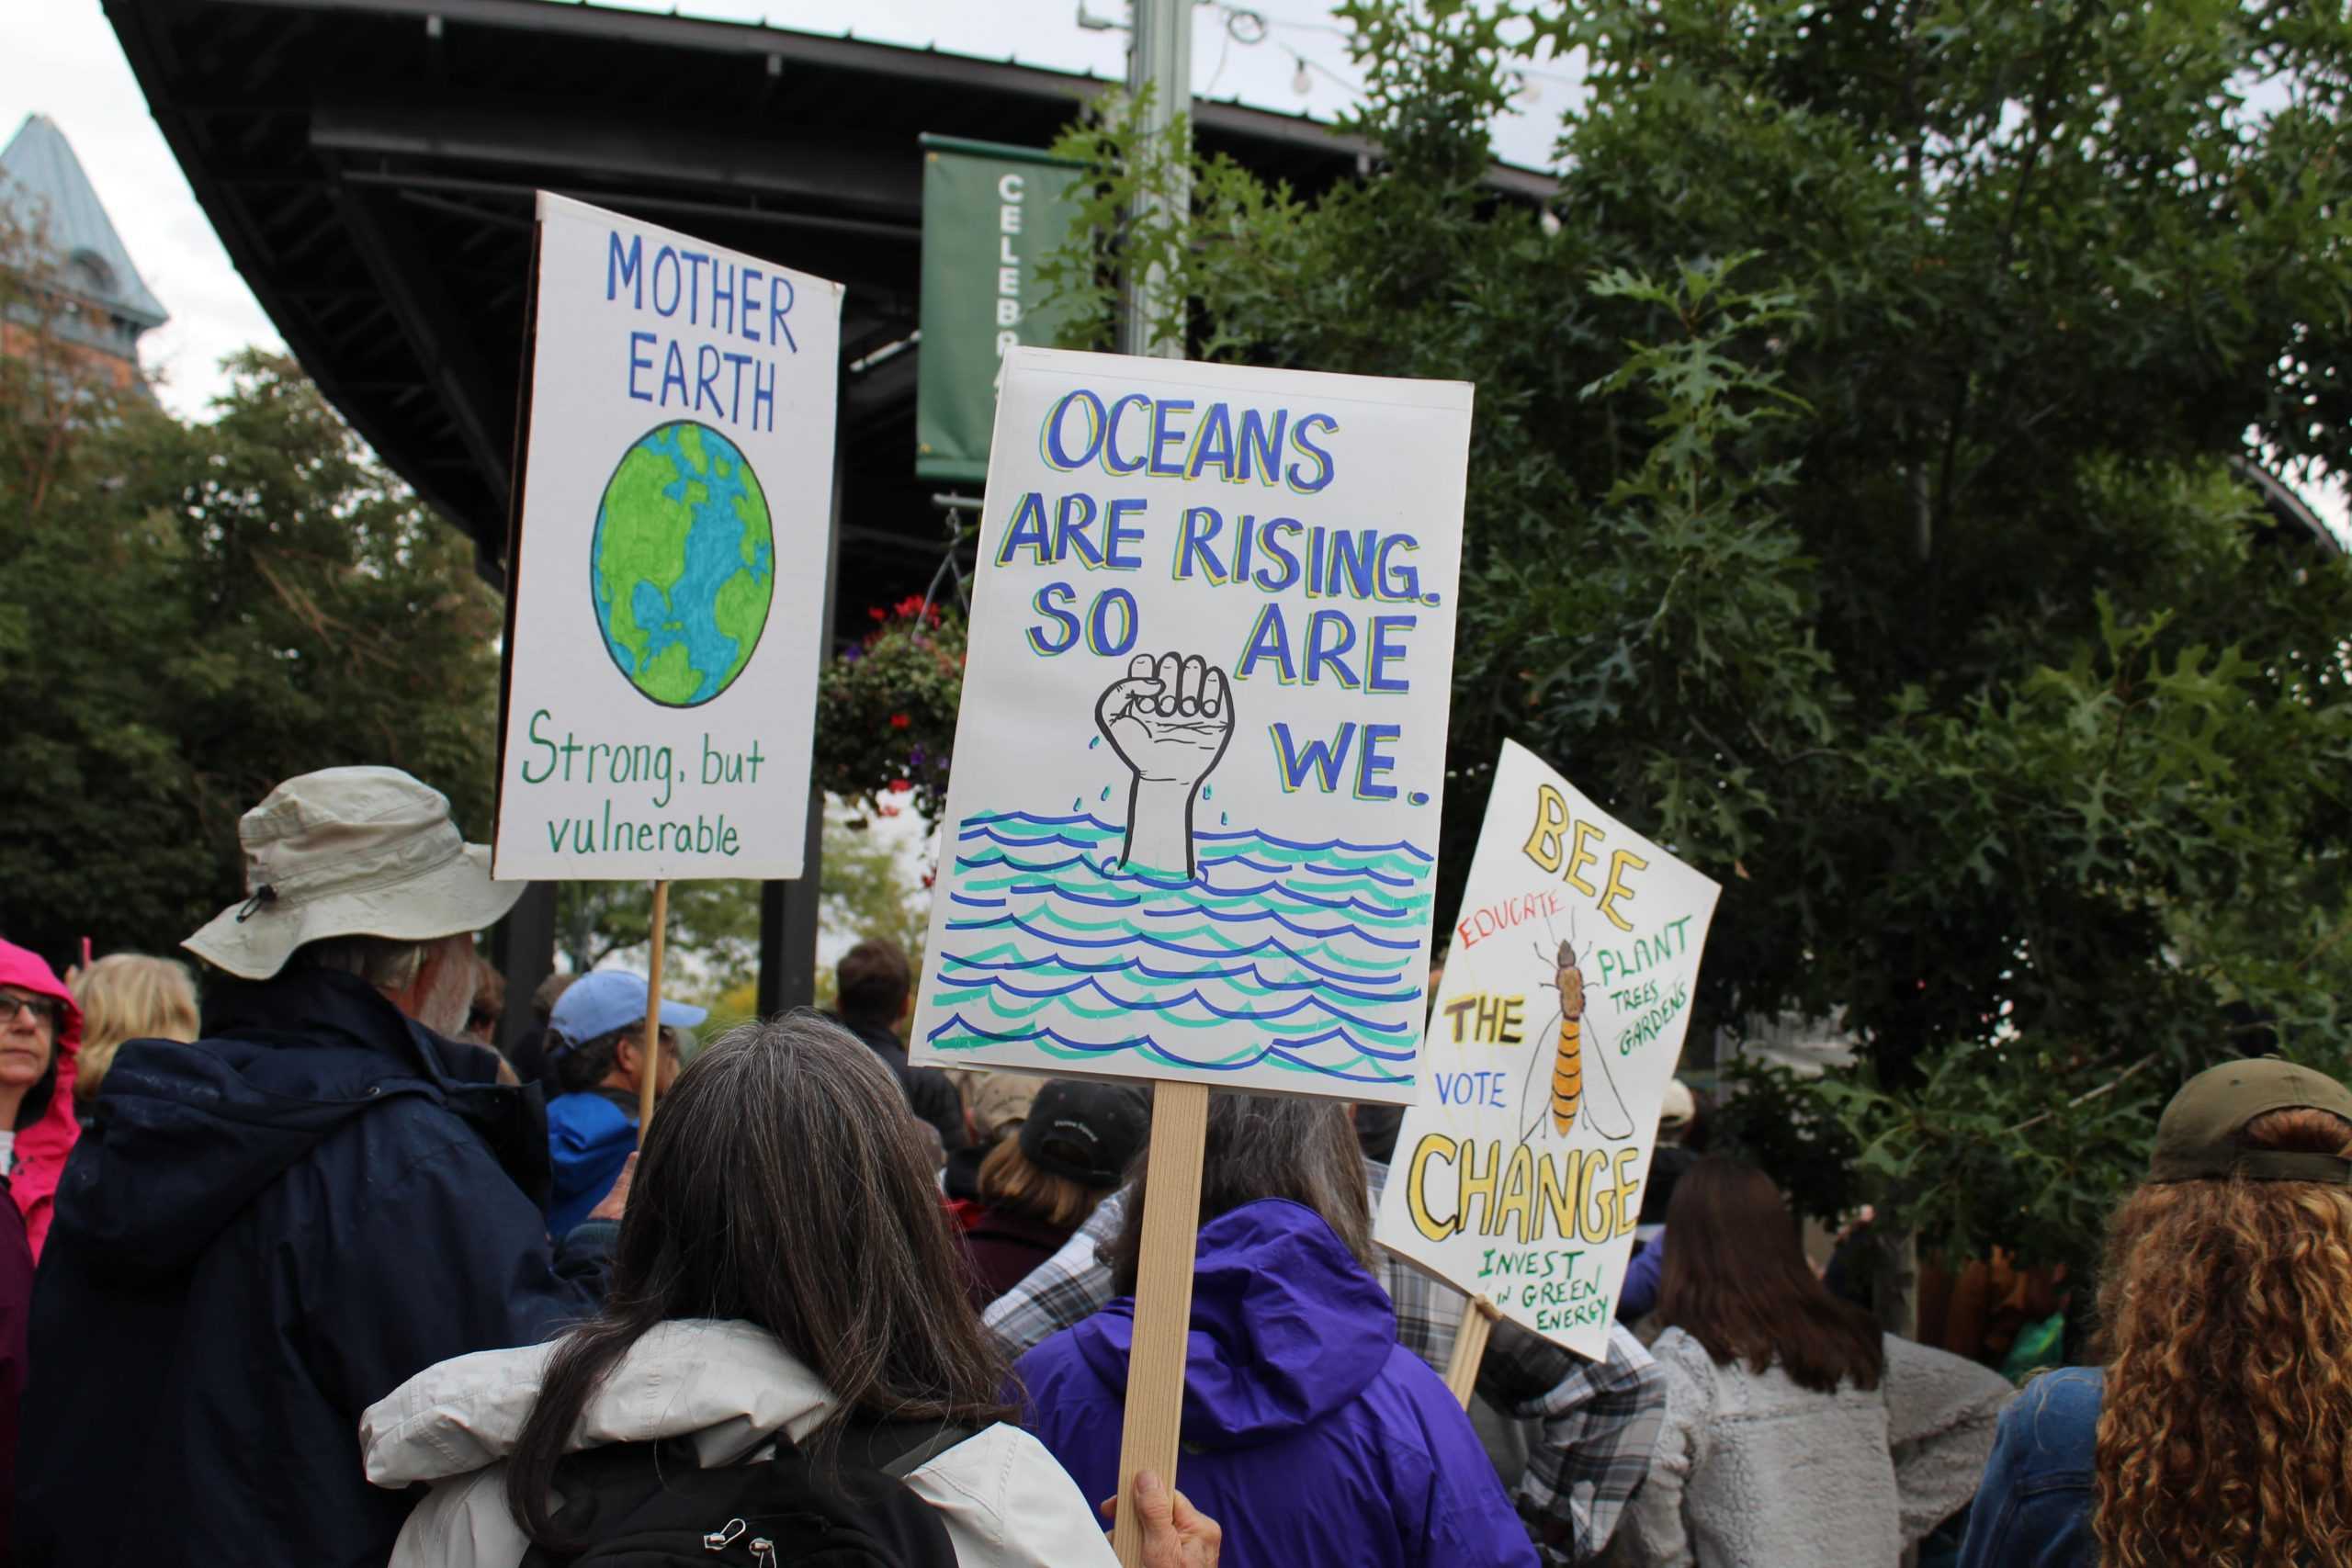 Climate change protest sign reading "OCeans are rising, so are we."